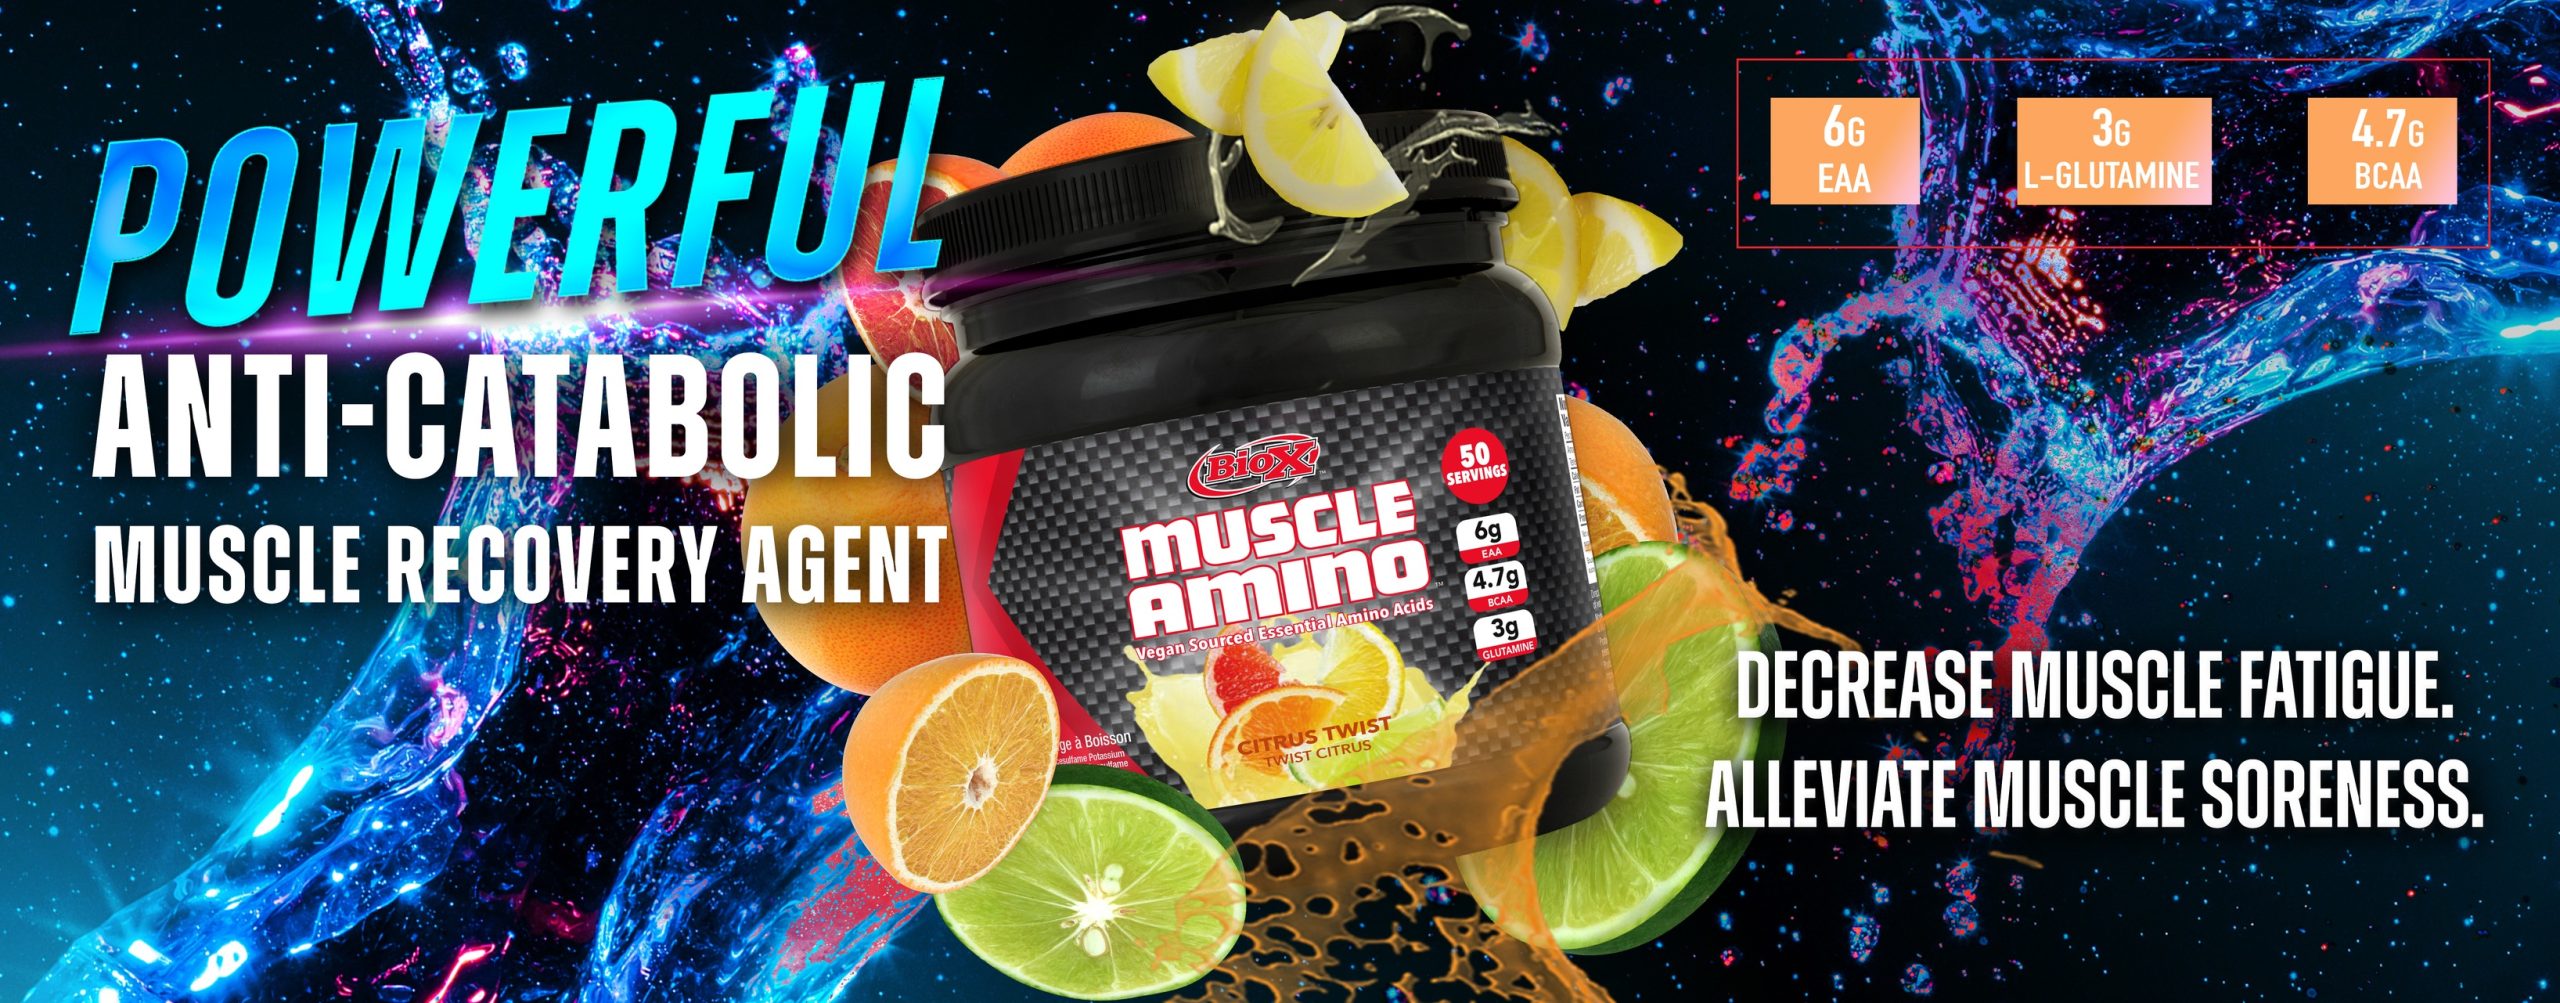 best muscle amino acids